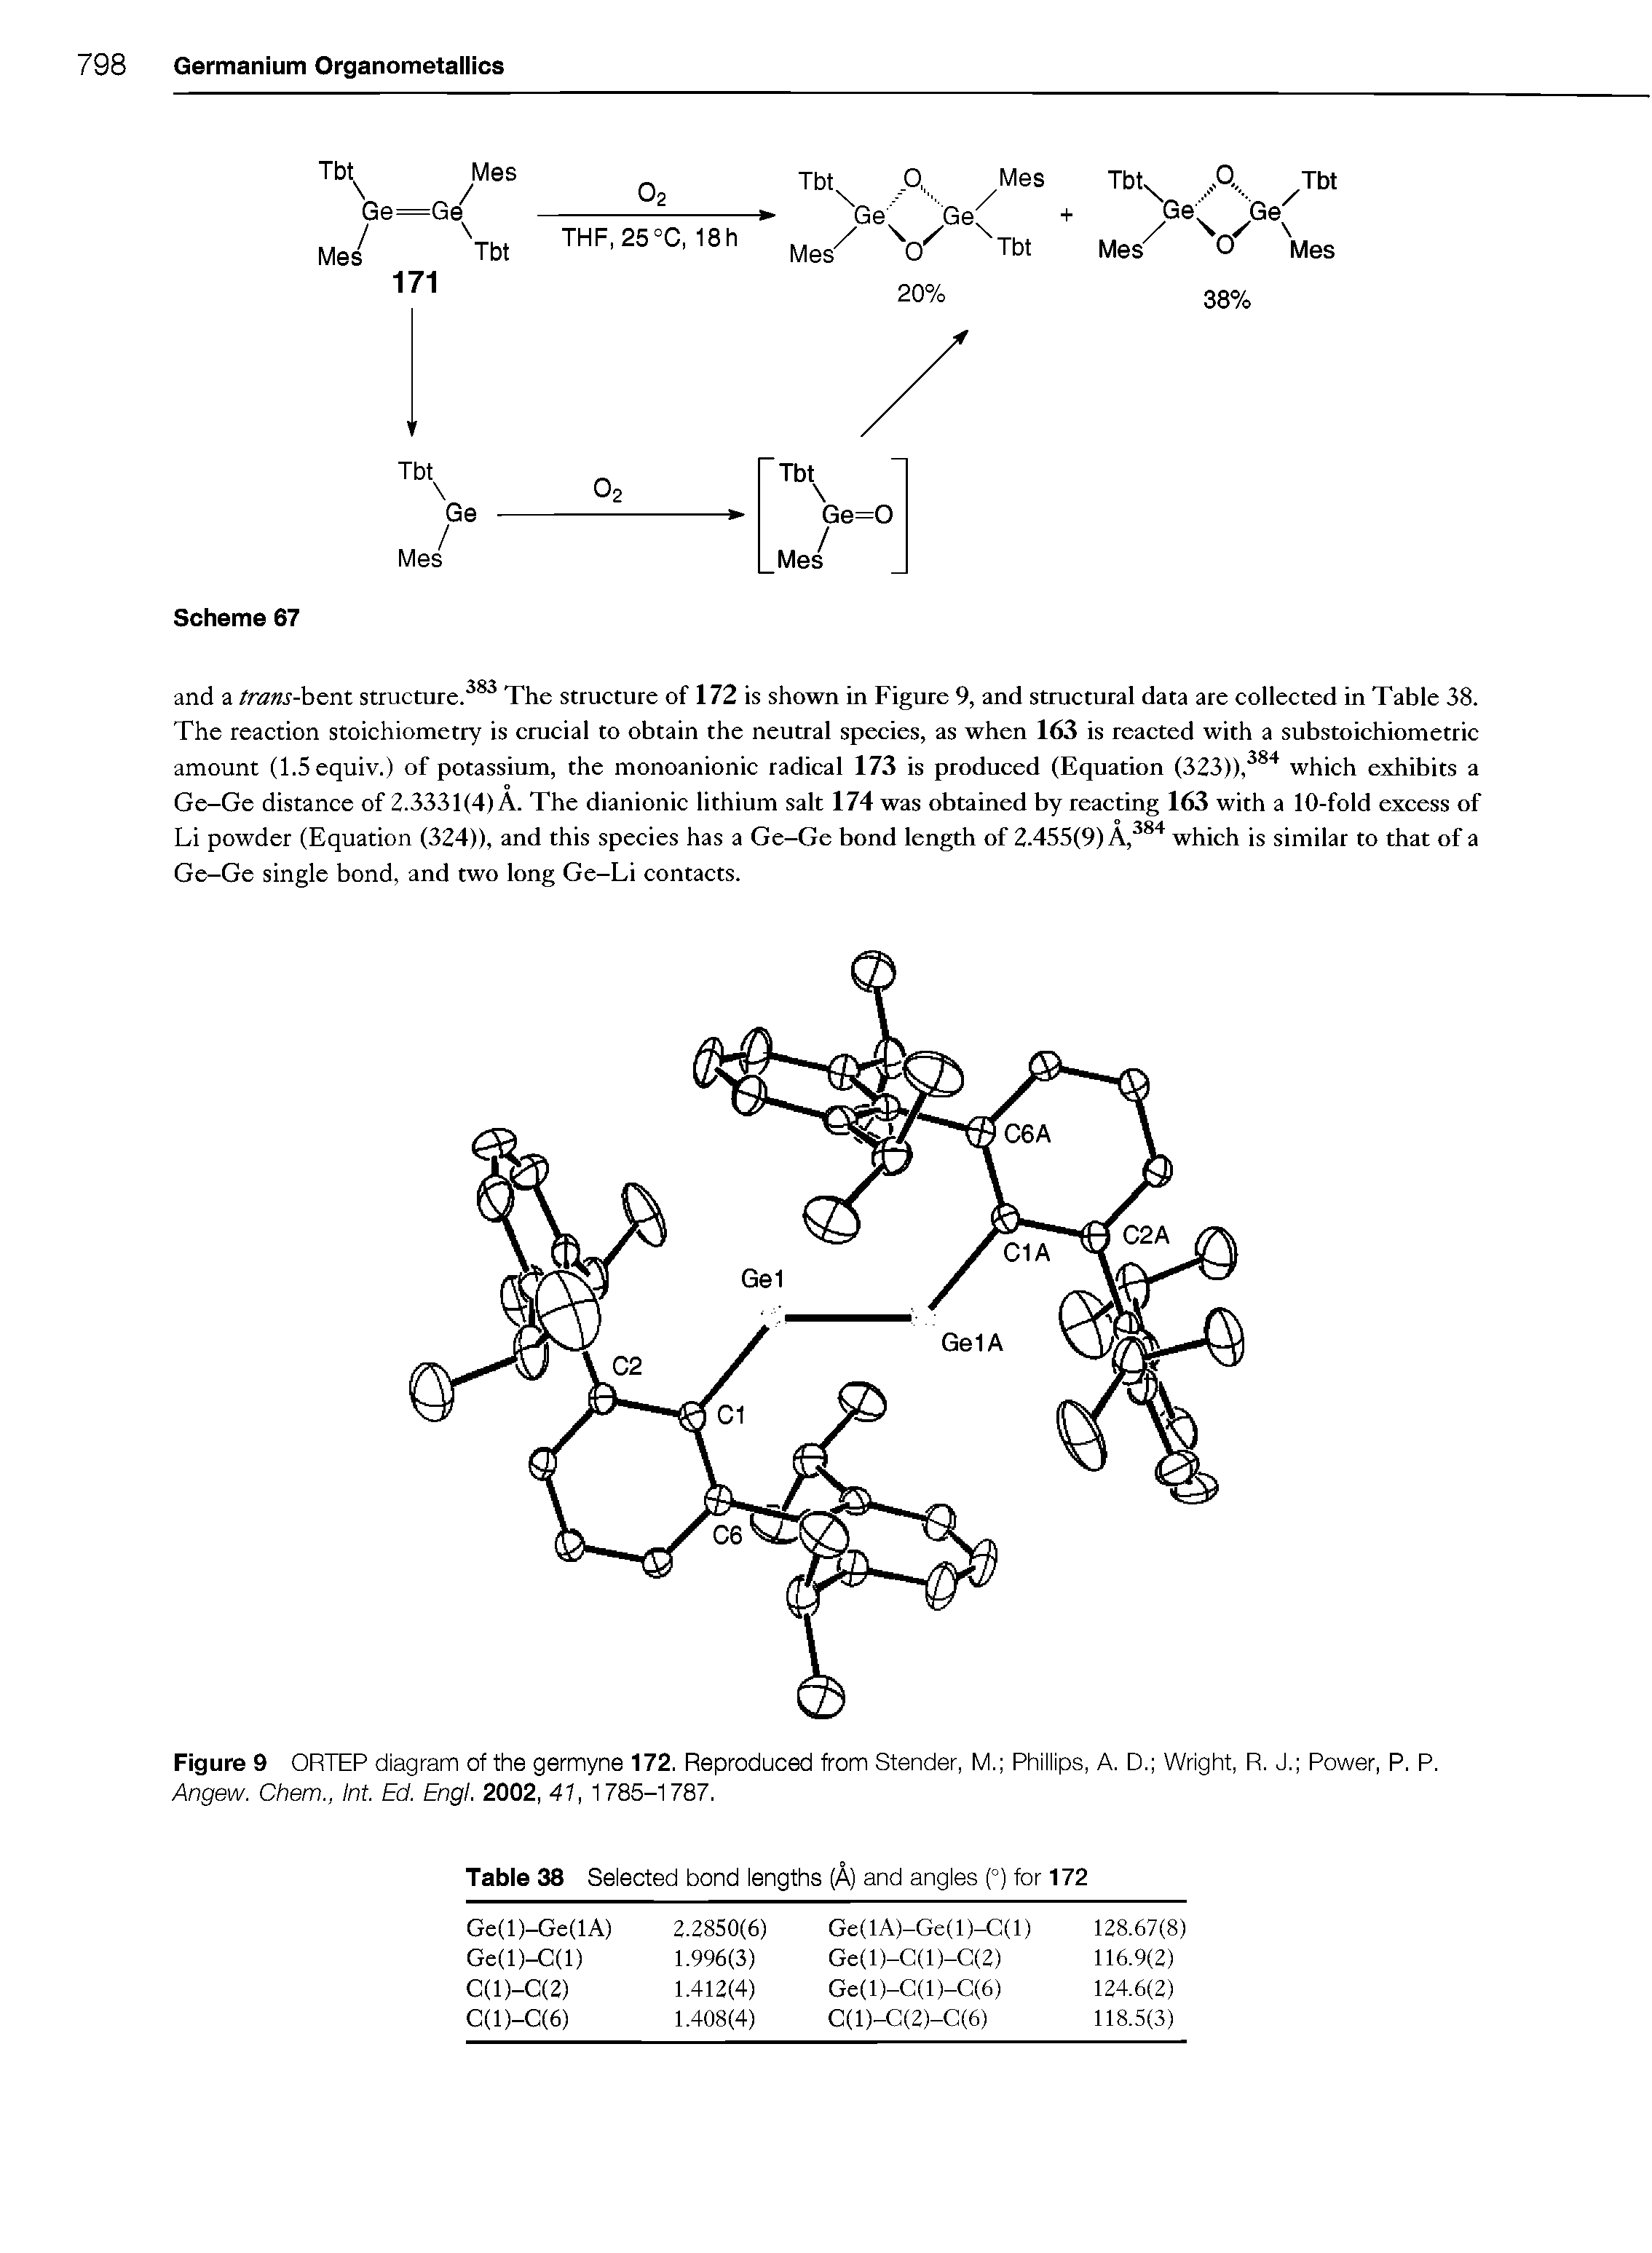 Figure 9 ORTEP diagram of the germyne 172. Reproduced from Stender, M. Phillips, A. D. Wright, R. J. Power, P. P. Angew. Chem., Int. Ed. Engl. 2002, 41, 1785-1787.